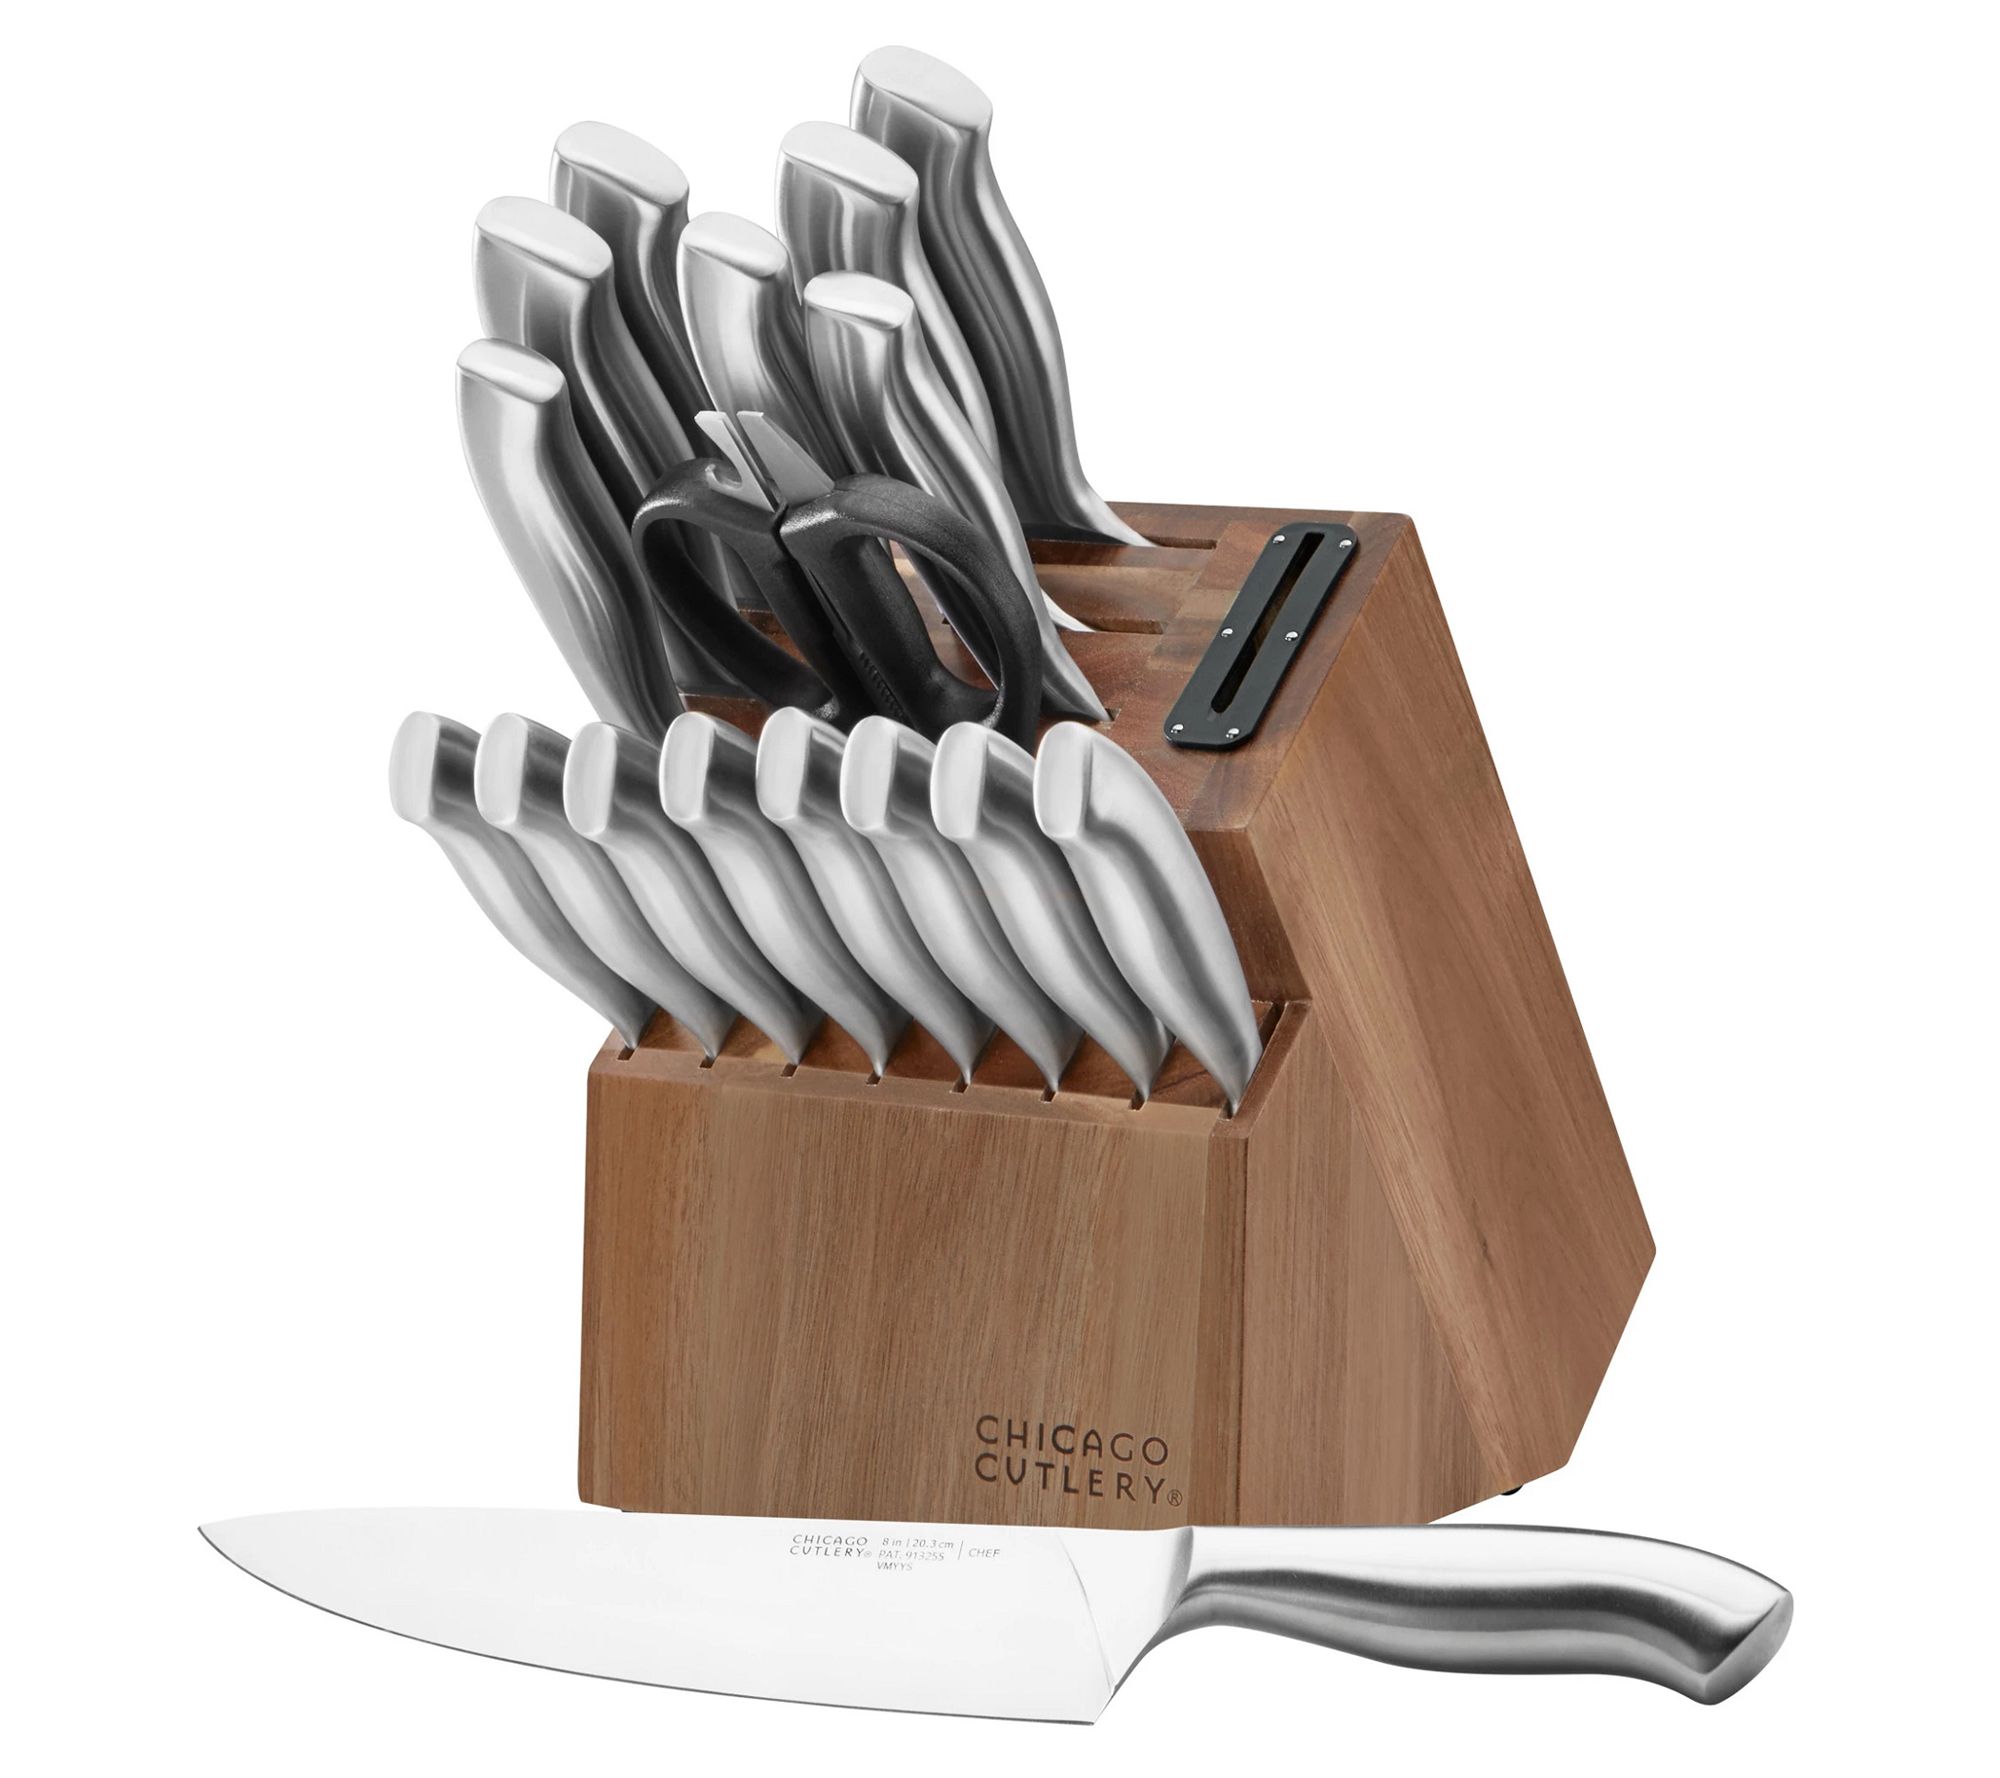 Cuisinart 8pc Cutlery Set with Magnetic Block